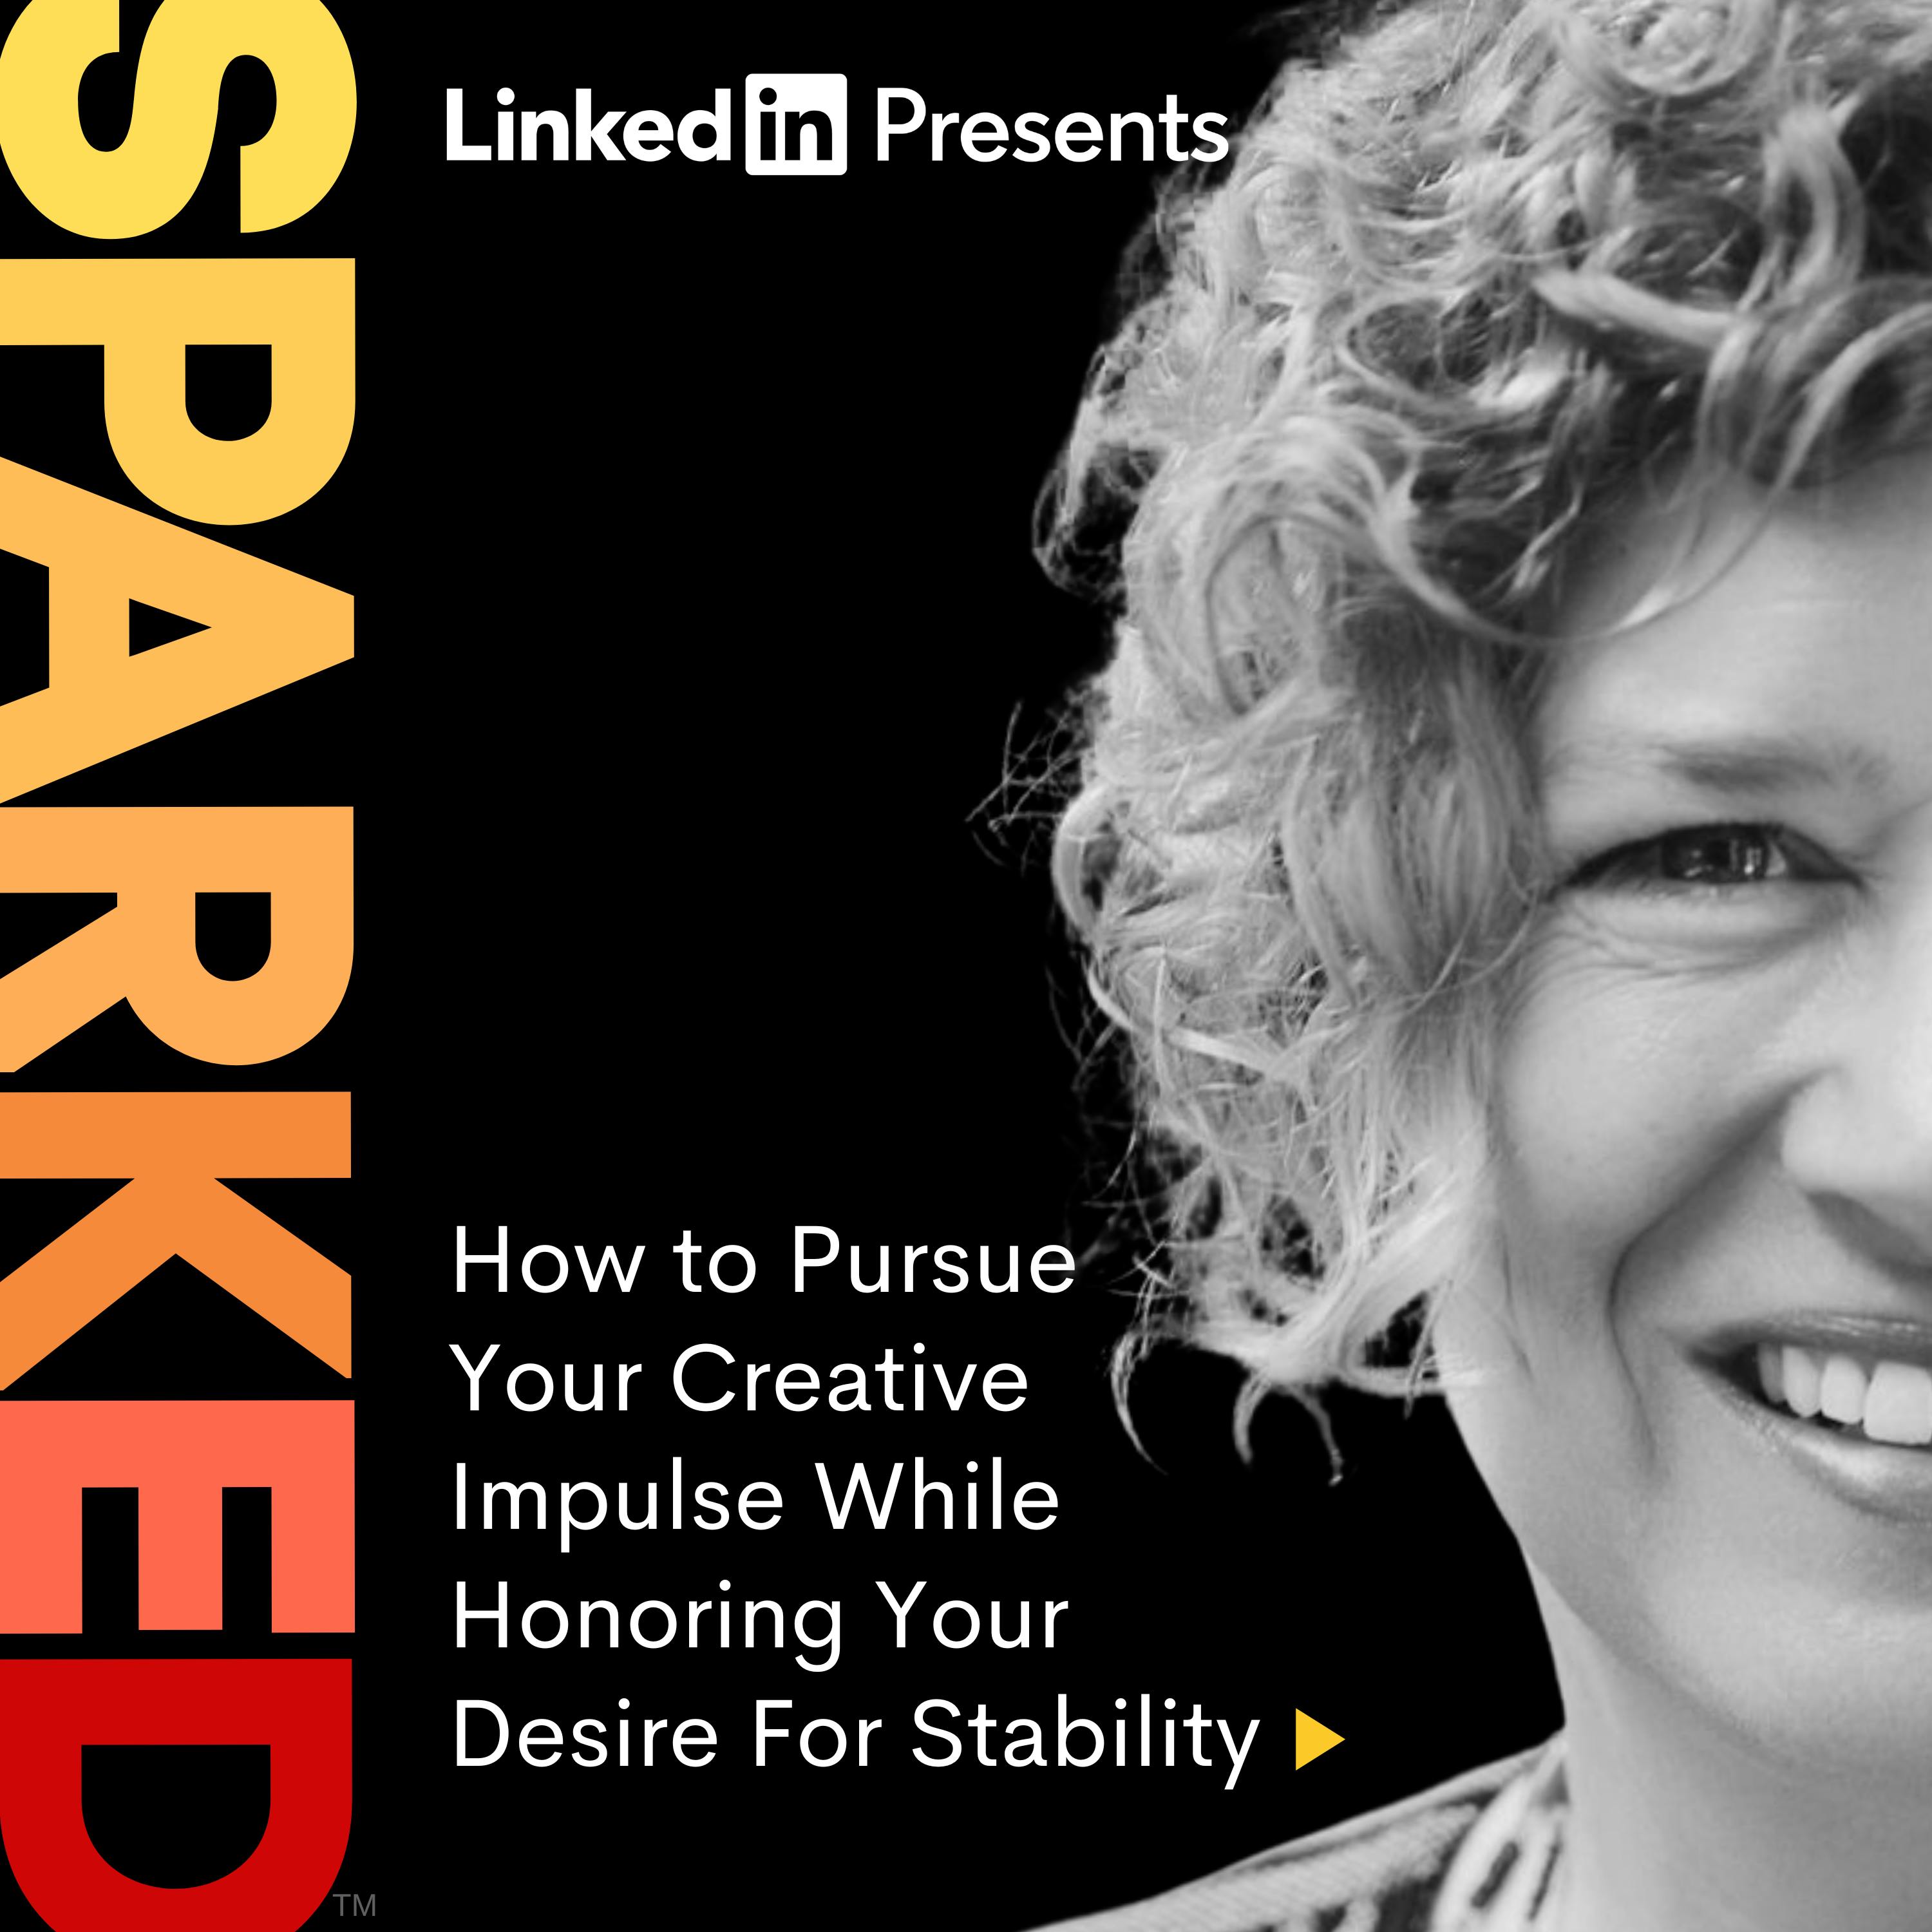 How to Pursue Your Creative Impulse While Honoring Your Desire For Stability